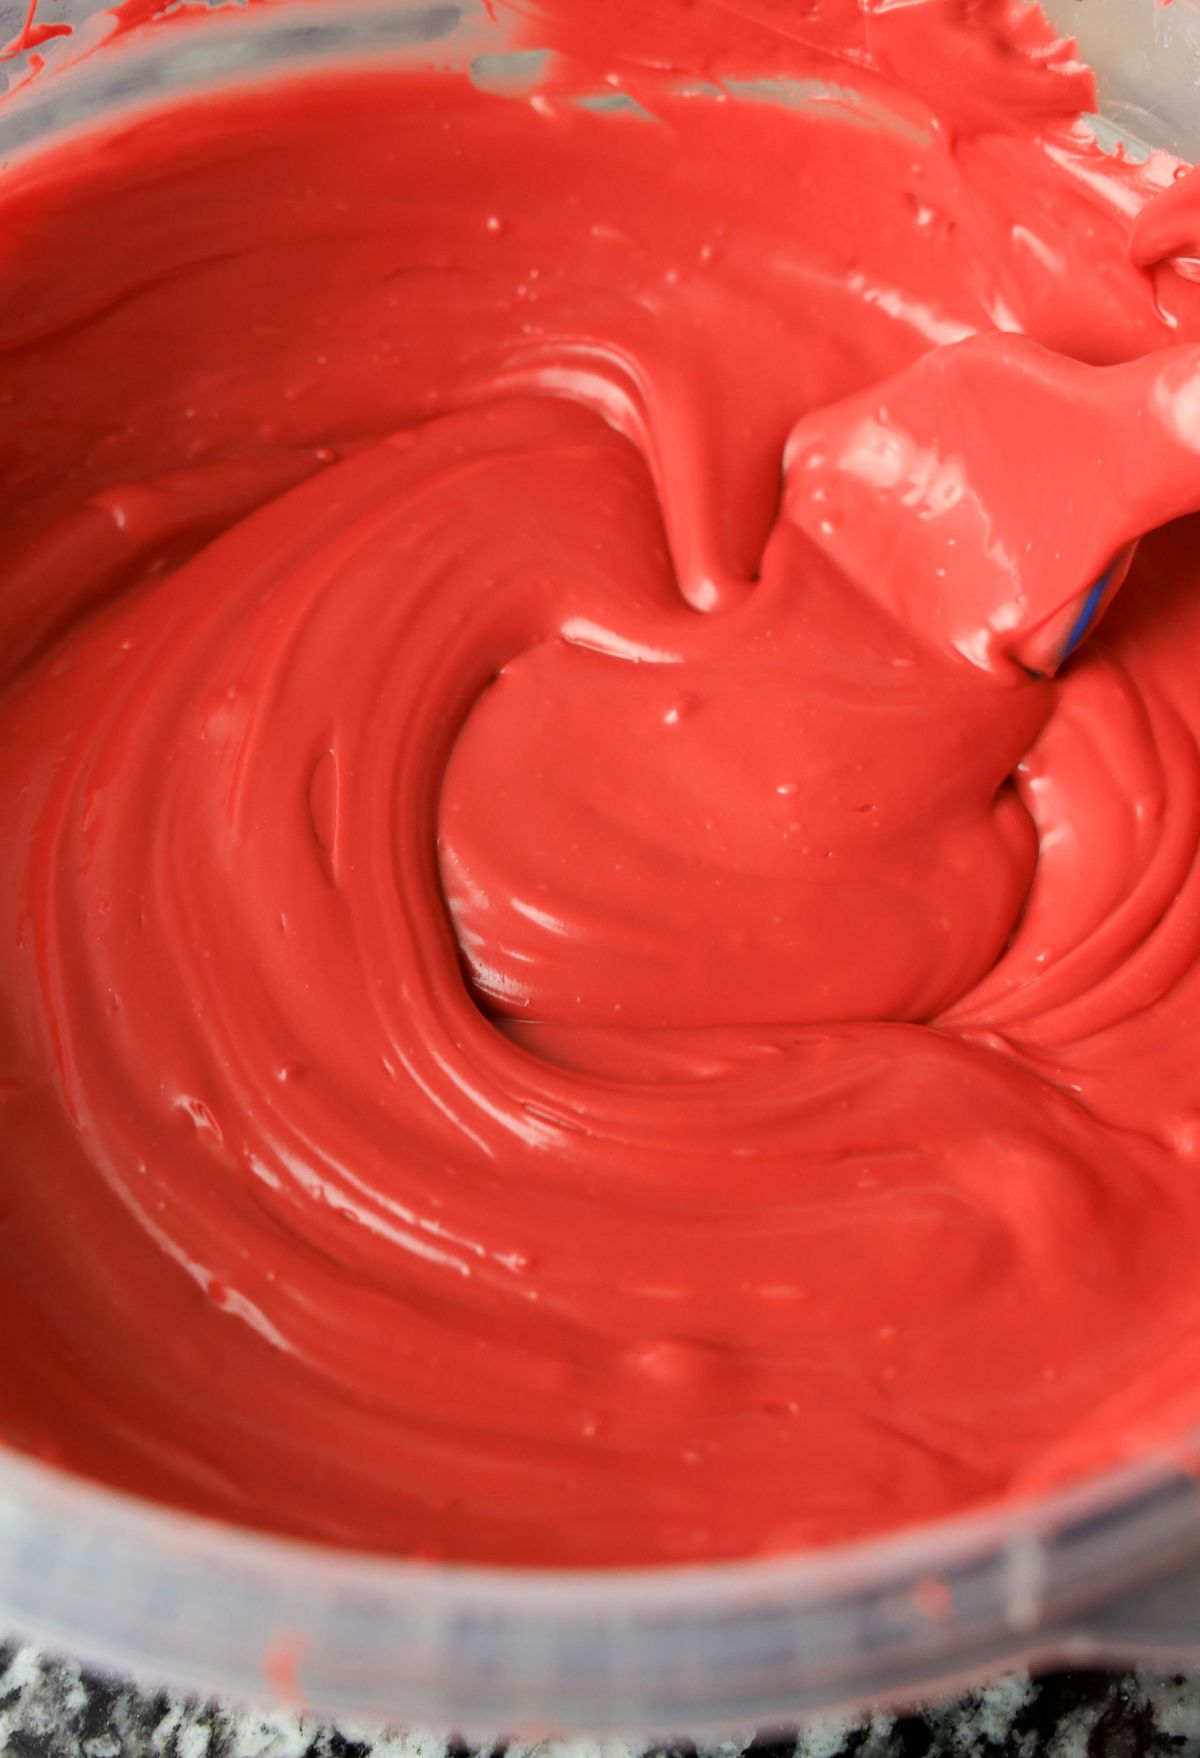 A bowl of red icing with a spoon in it.